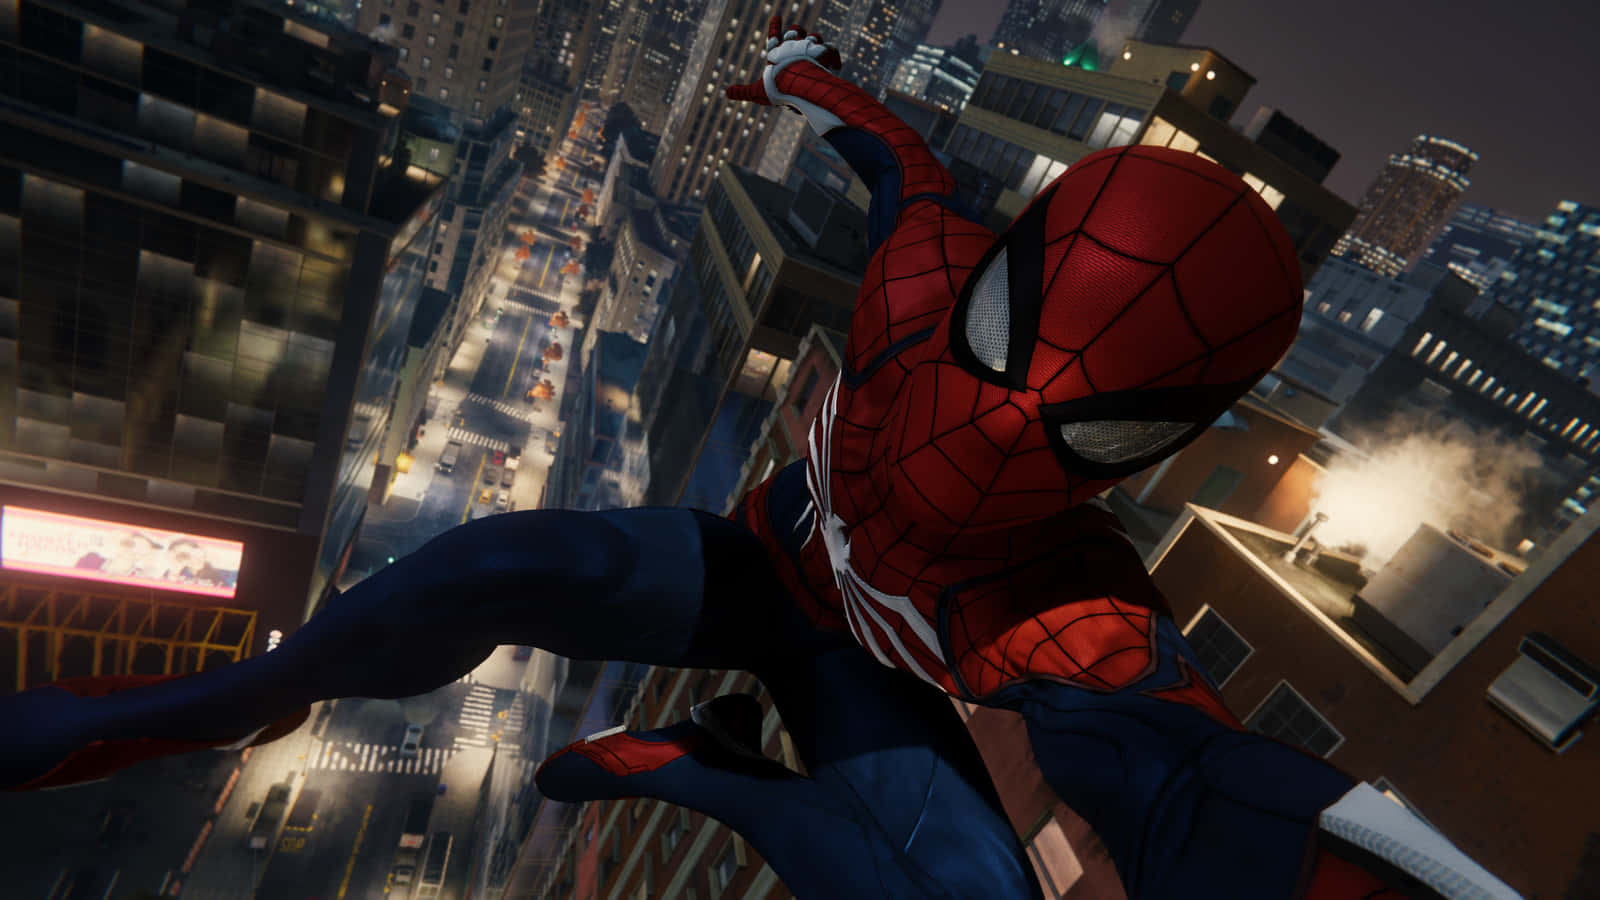 Ultimate Spider-man in action on a rooftop at night Wallpaper